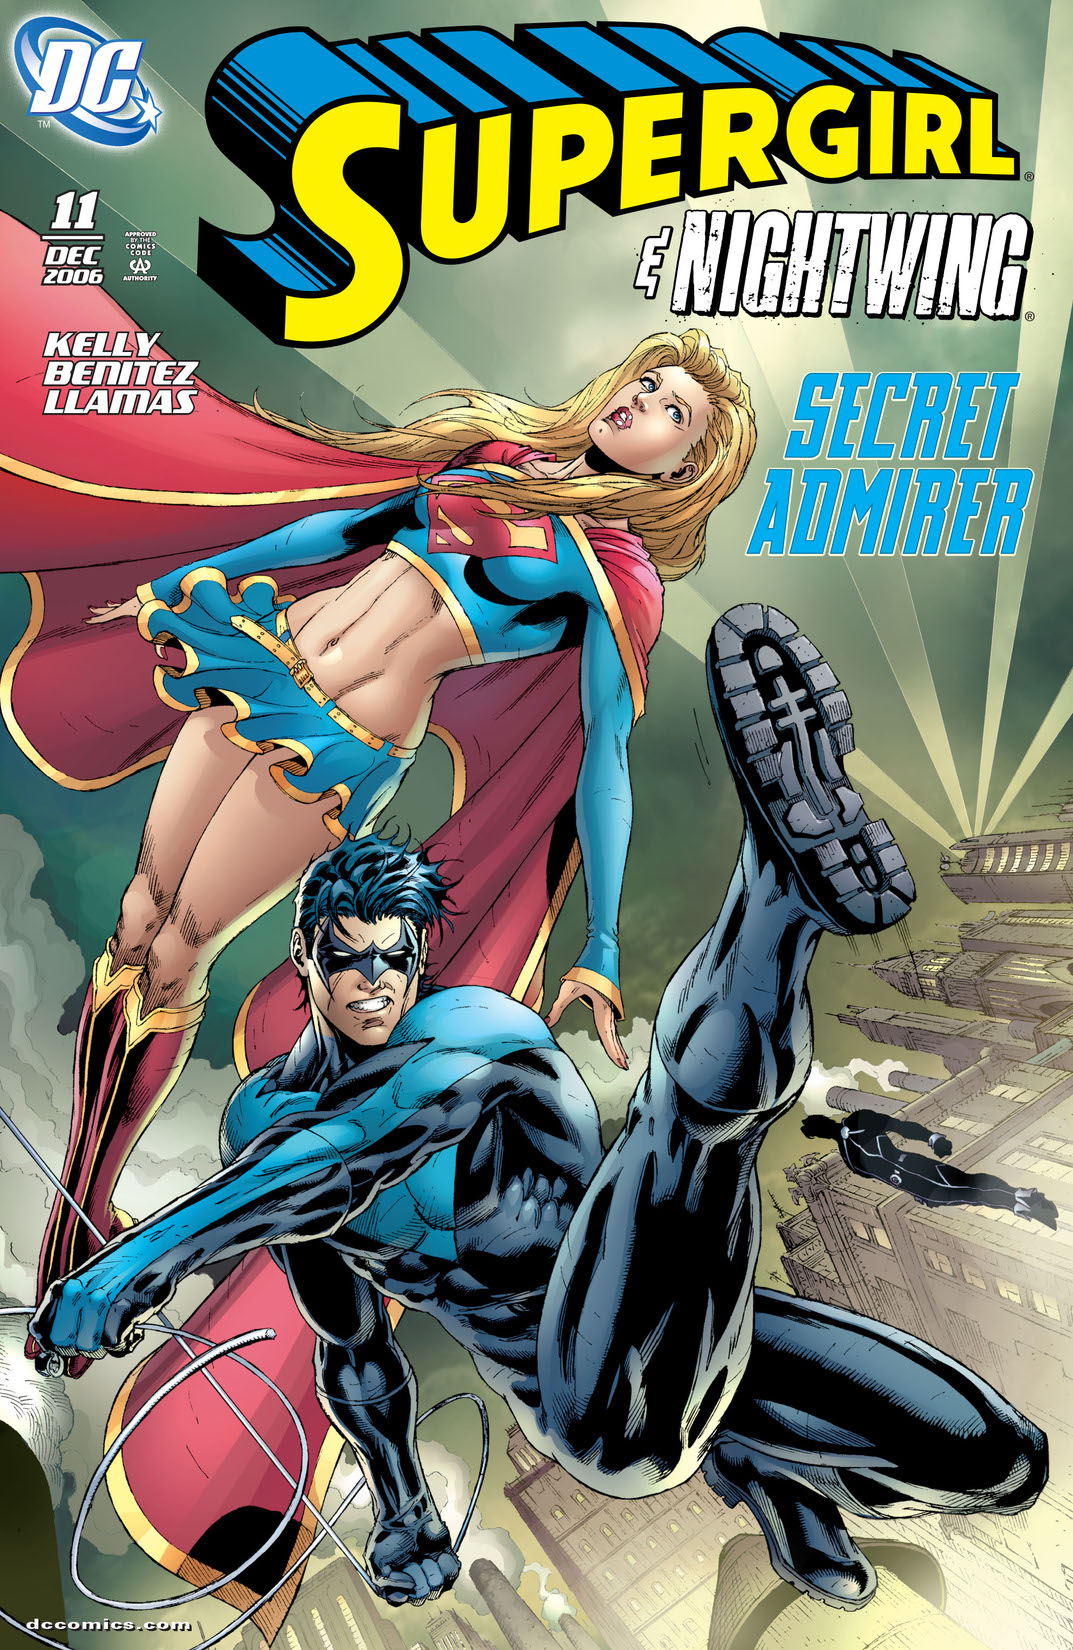 Supergirl (2005-) #11 preview images